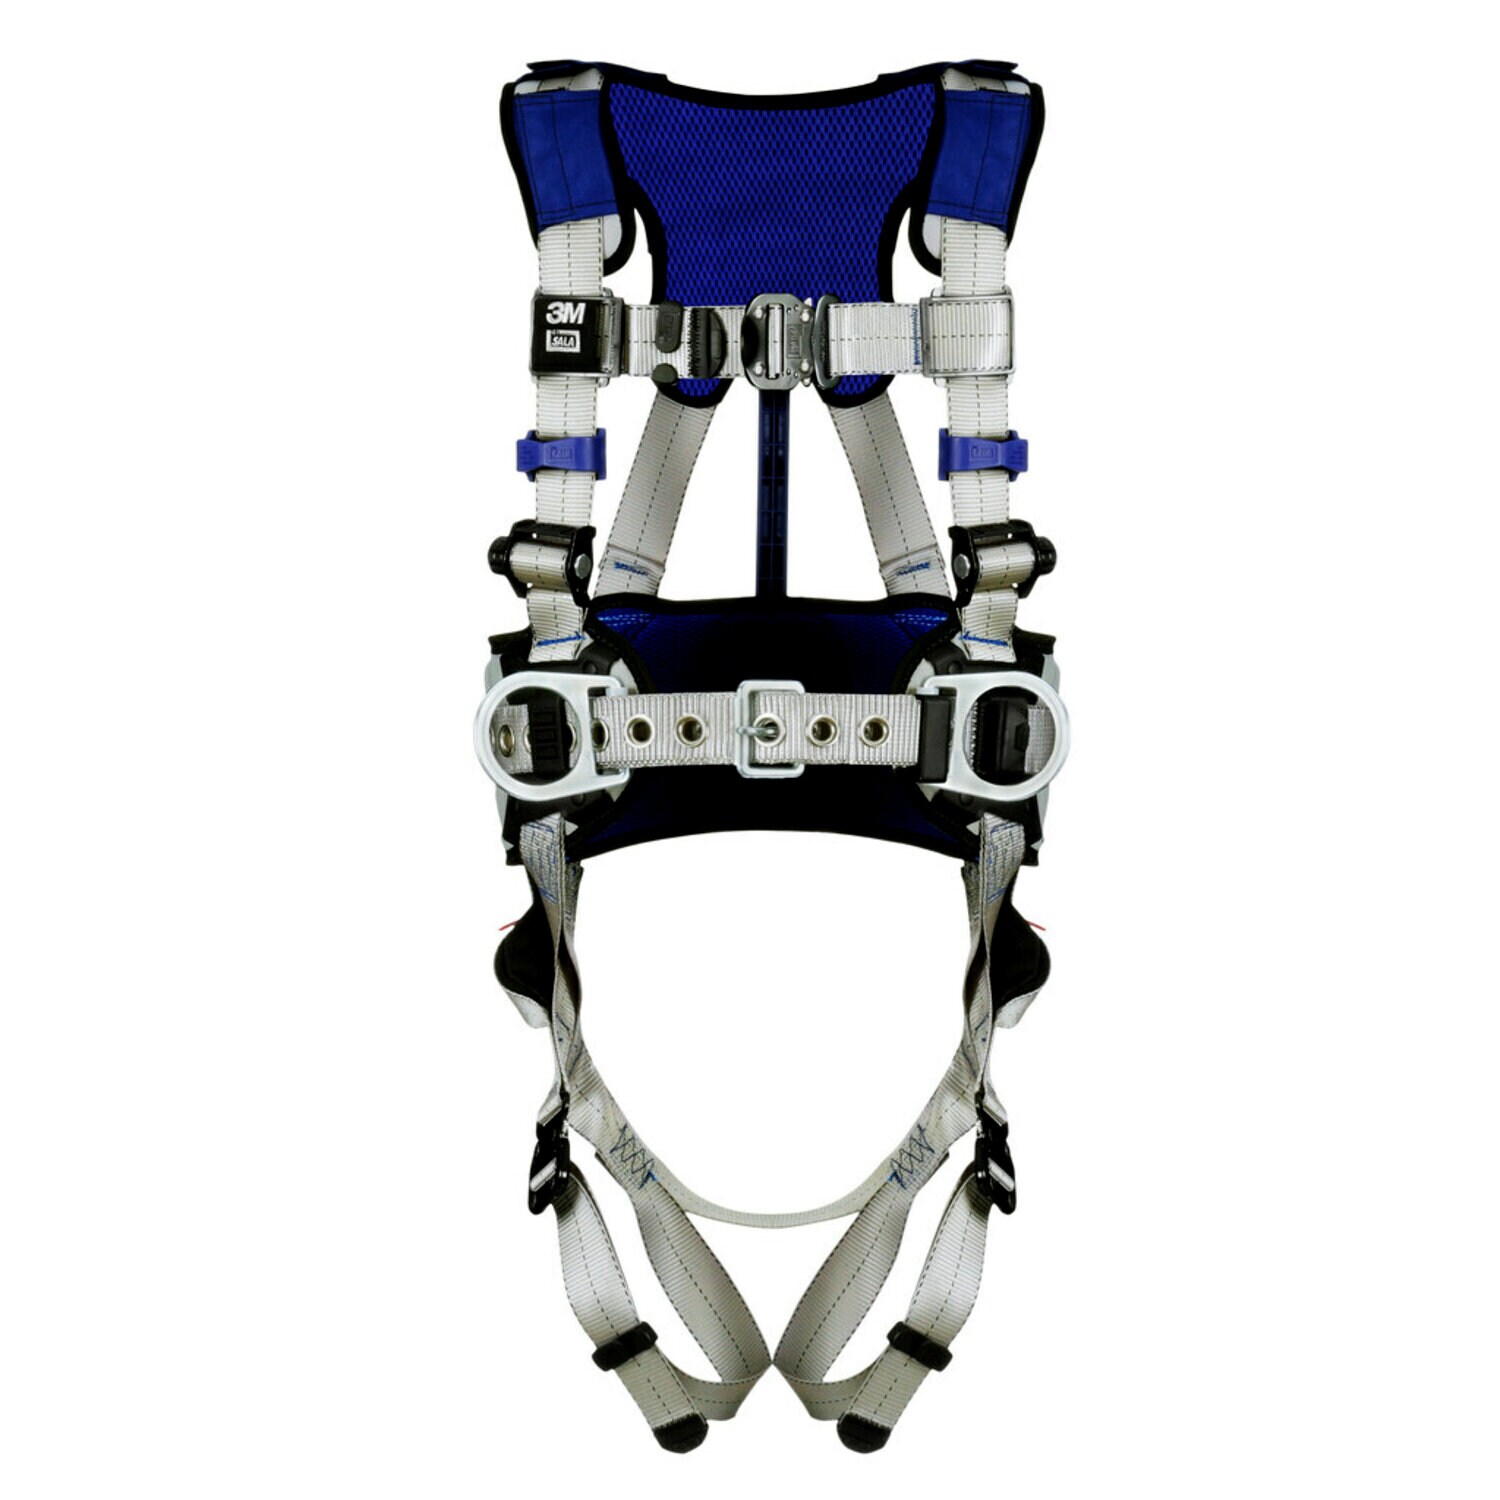 7012817527 - 3M DBI-SALA ExoFit X100 Comfort Construction Positioning Safety Harness 1401050, Small